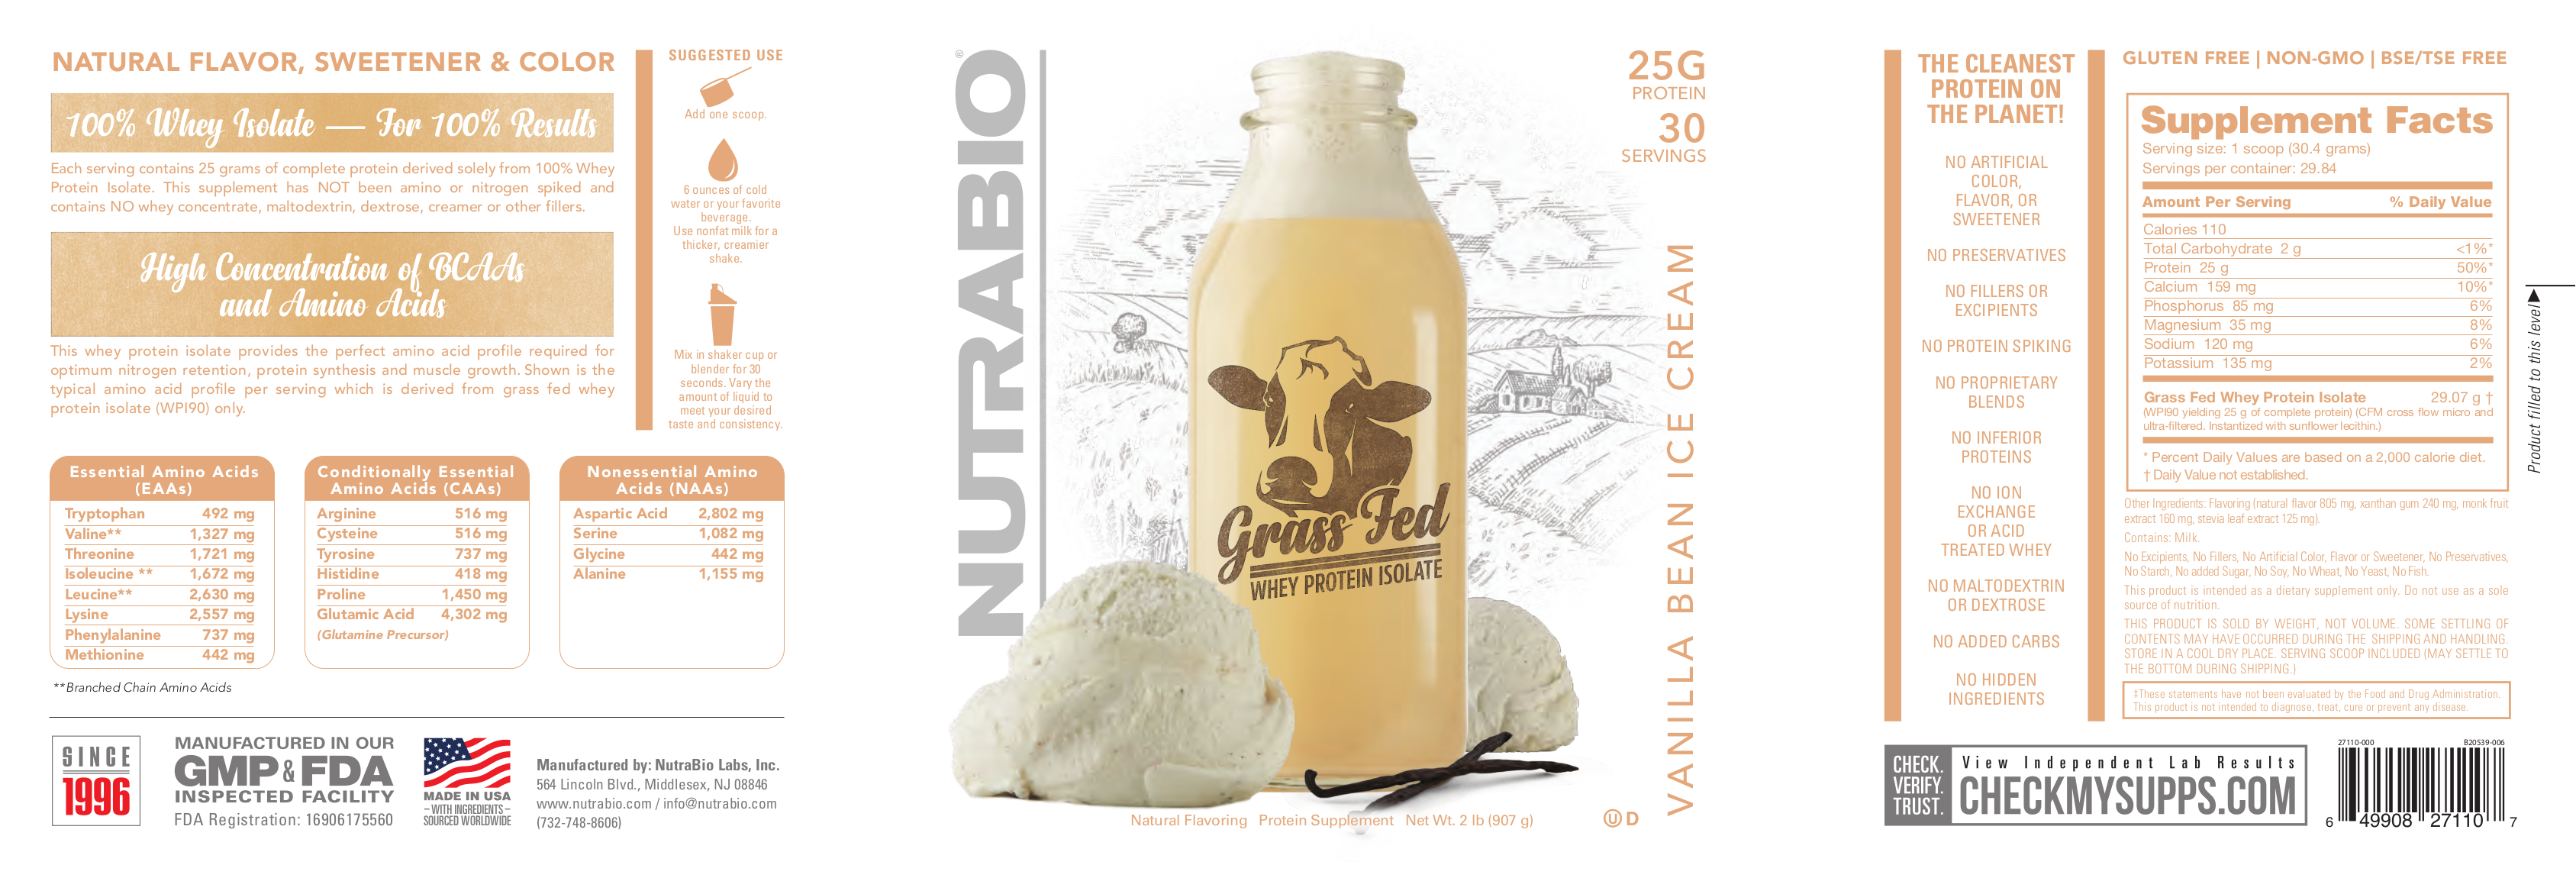 NutraBio Grass-Fed Whey Protein Isolate Label